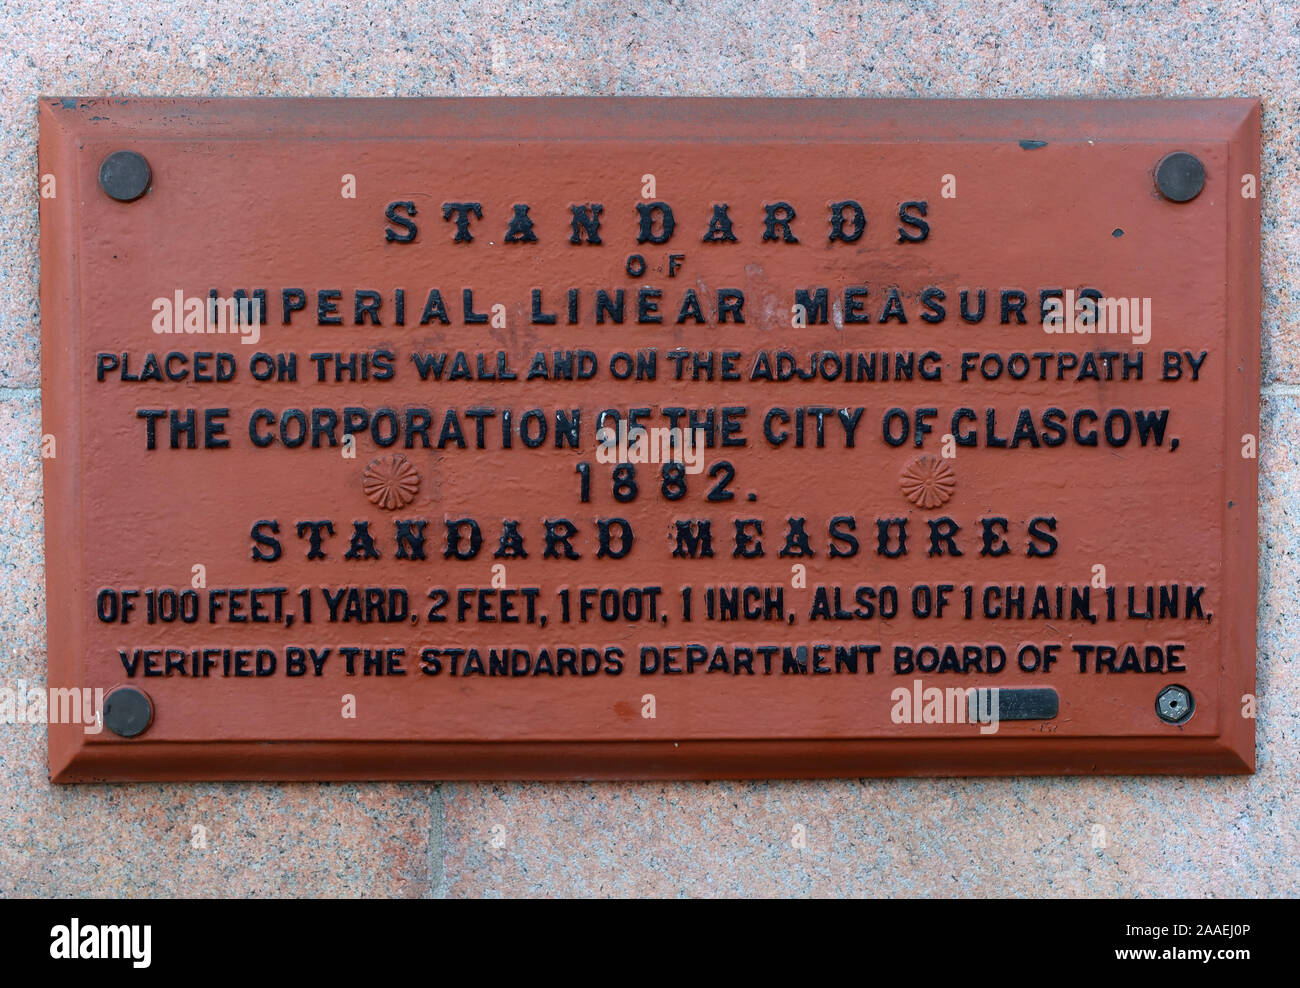 Standards of Imperial Linear Measures,Corporation of the city of Glasgow, 1882,plaque,George Square, Scotland, UK Stock Photo